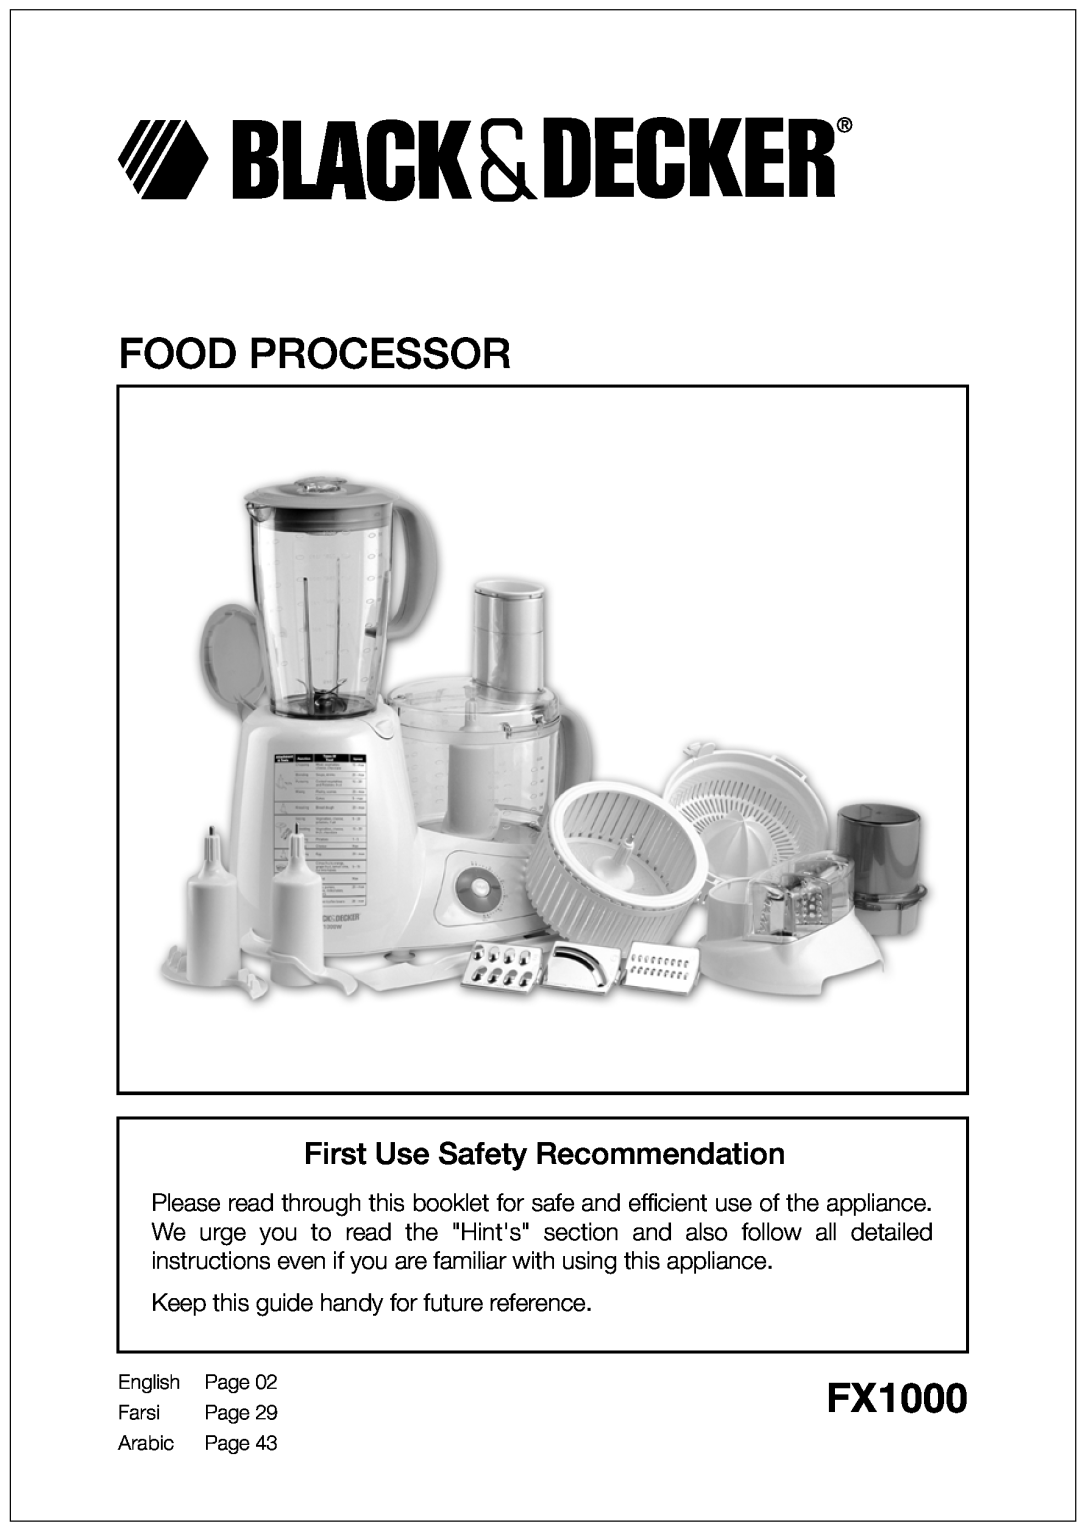 Black & Decker FX1000 manual Food Processor, First Use Safety Recommendation, English, Page, Farsi, Arabic 